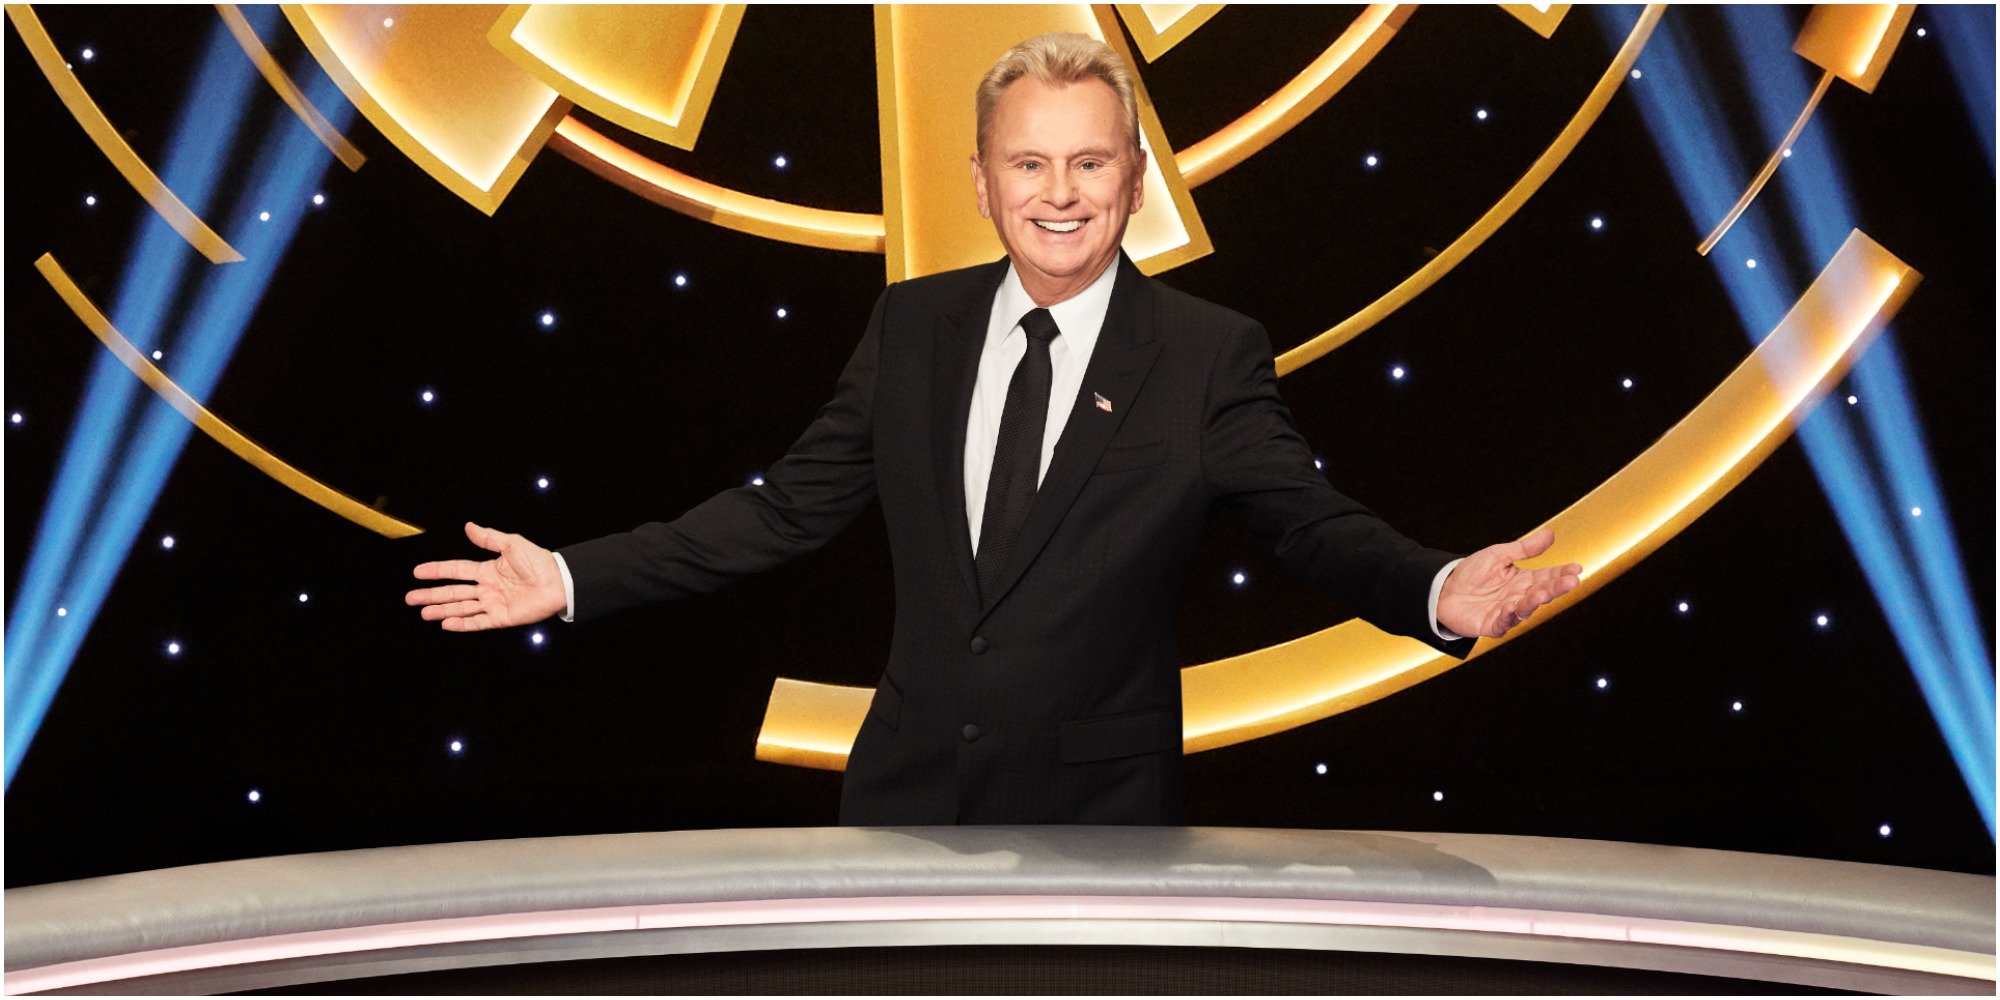 ‘Wheel of Fortune’: Pat Sajak Reveals a Major Change to ‘America’s Game’